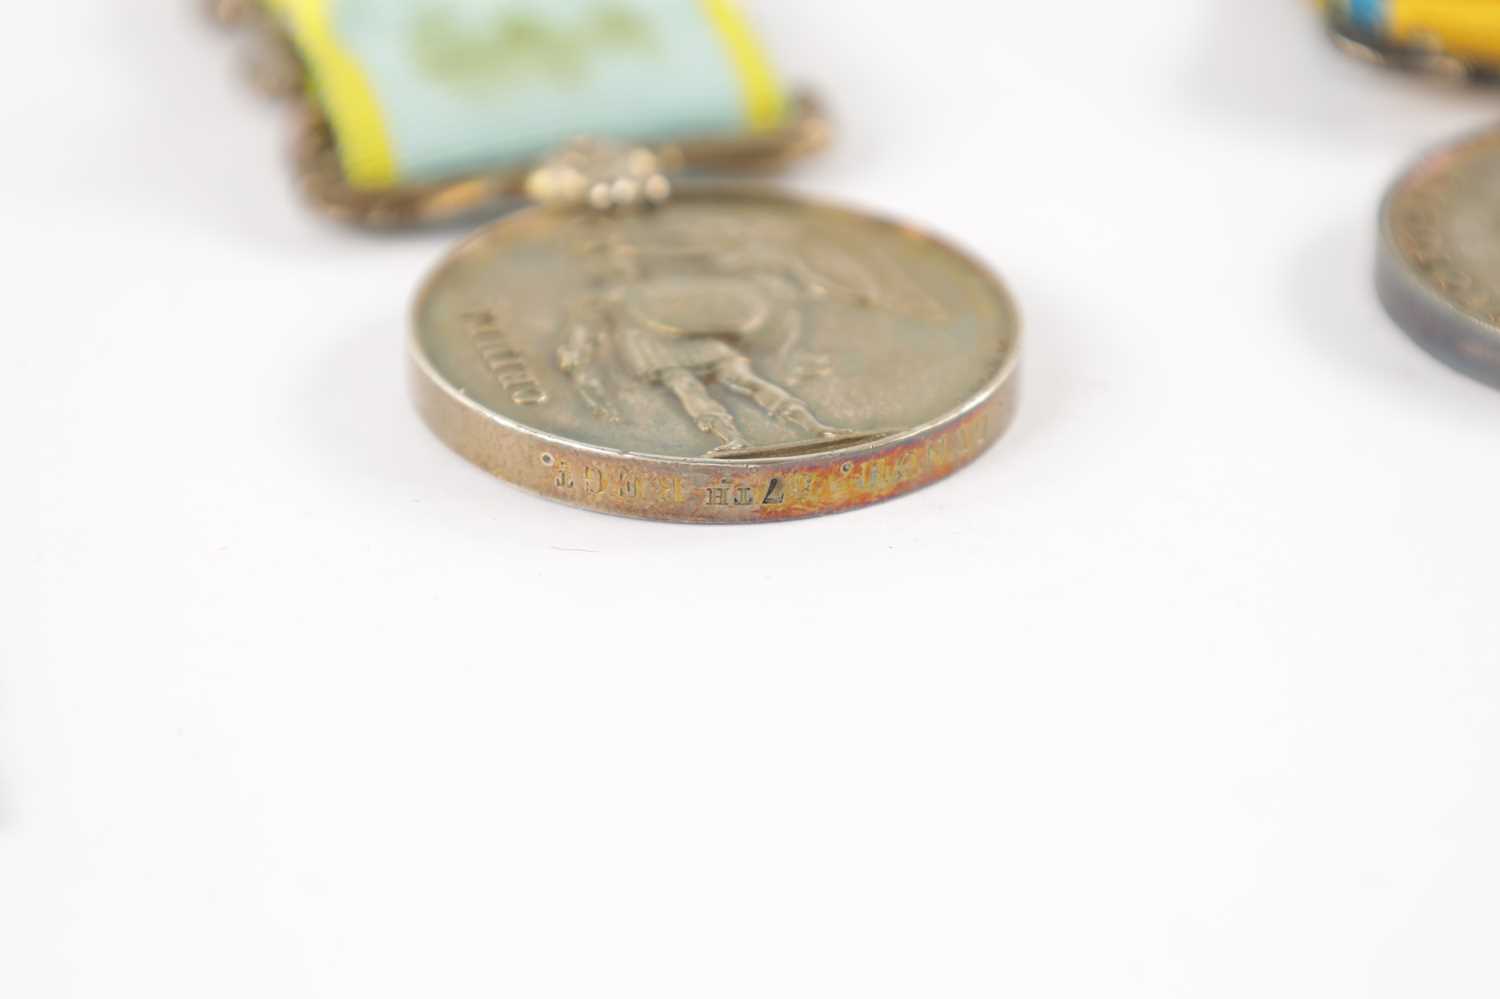 A CRIMEA 1854-56 MEDAL WITH THREE CLASPS - Image 8 of 10